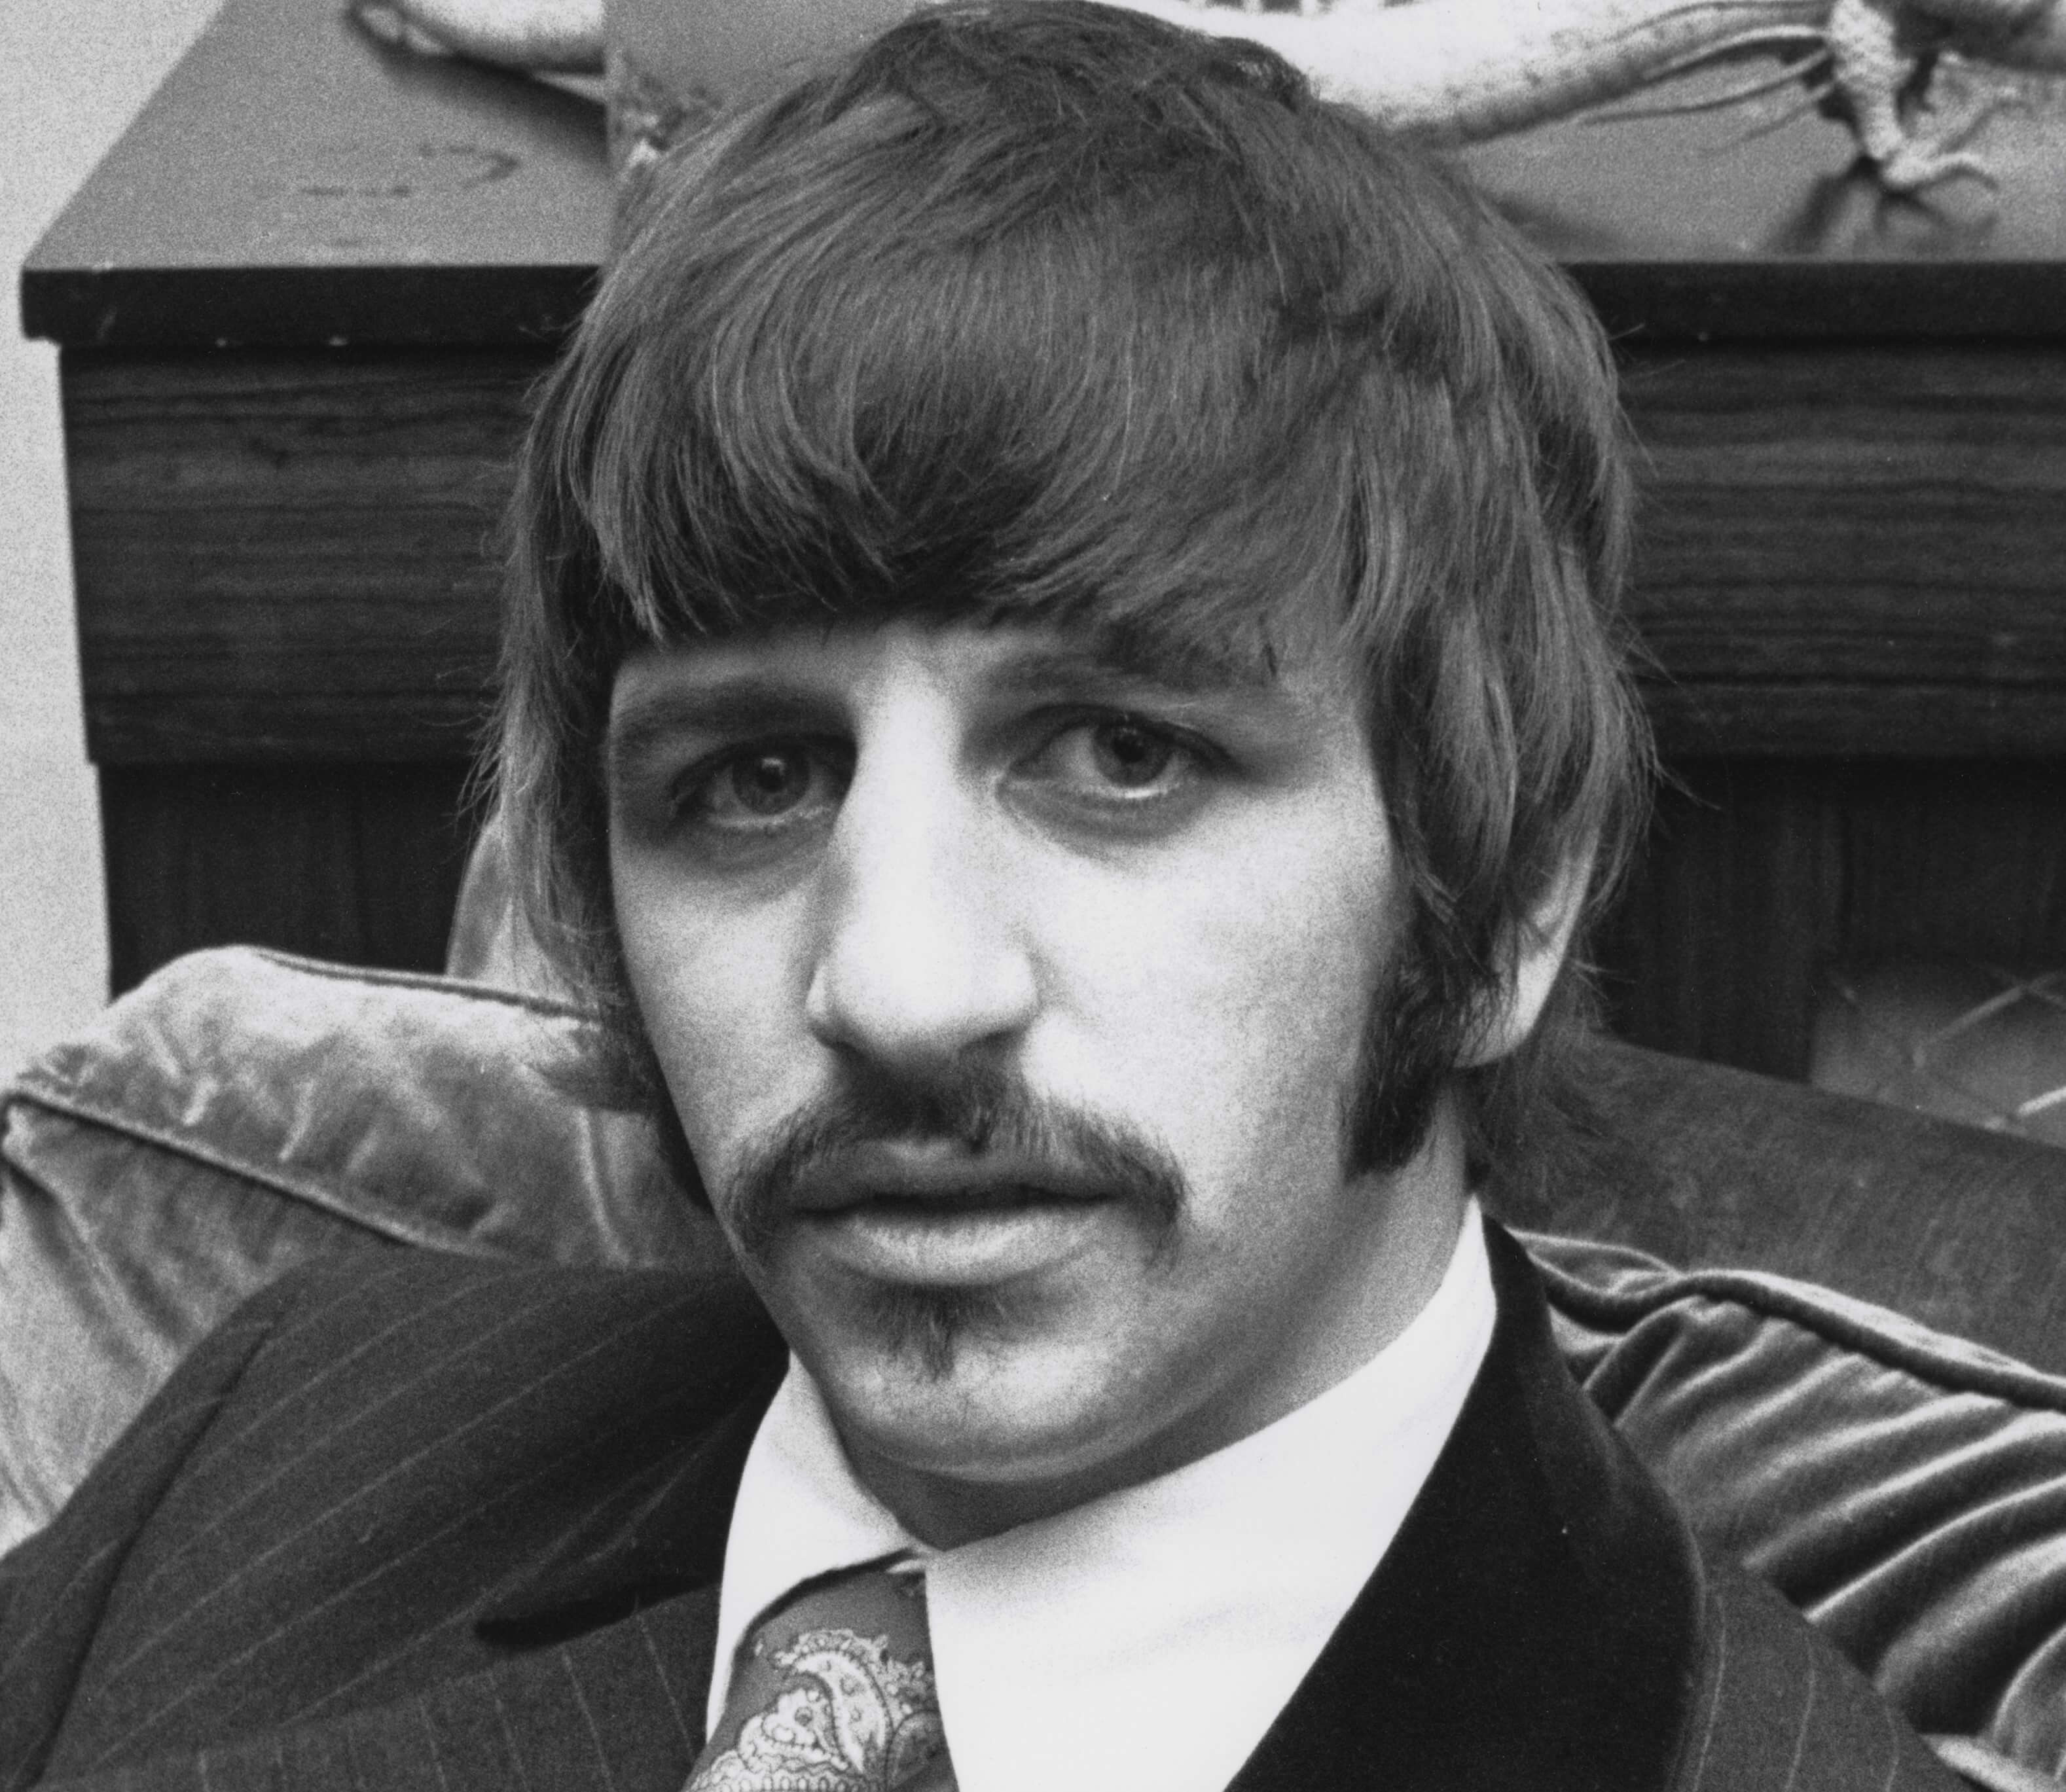 "You're Sixteen" singer Ringo Starr in a suit